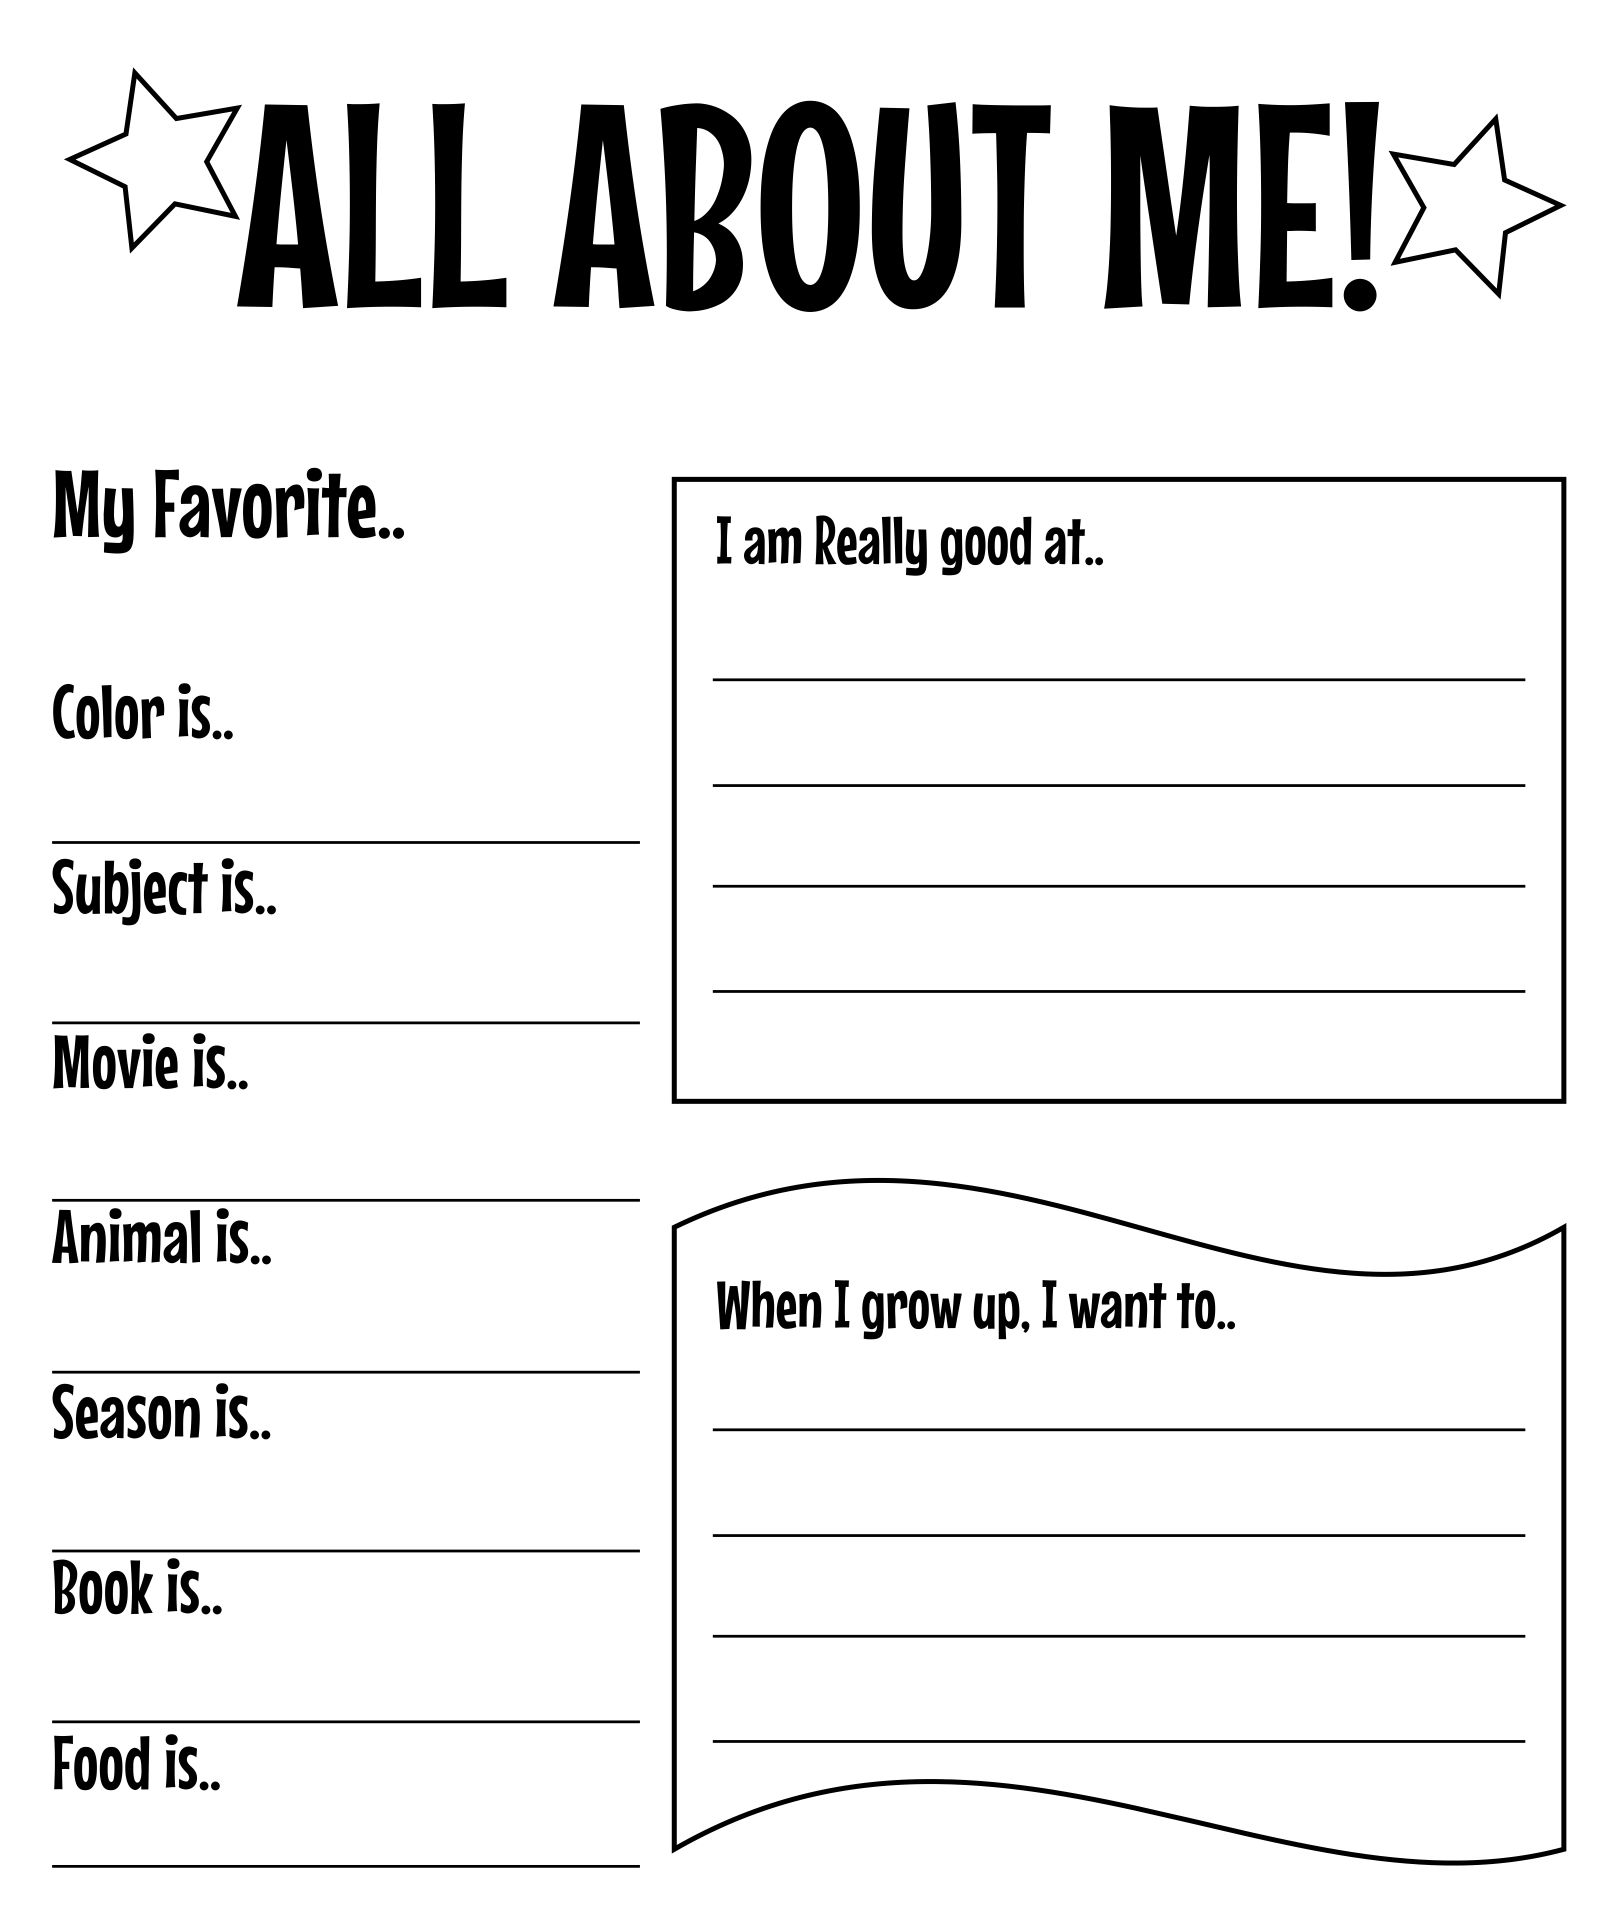 free-all-about-me-printable